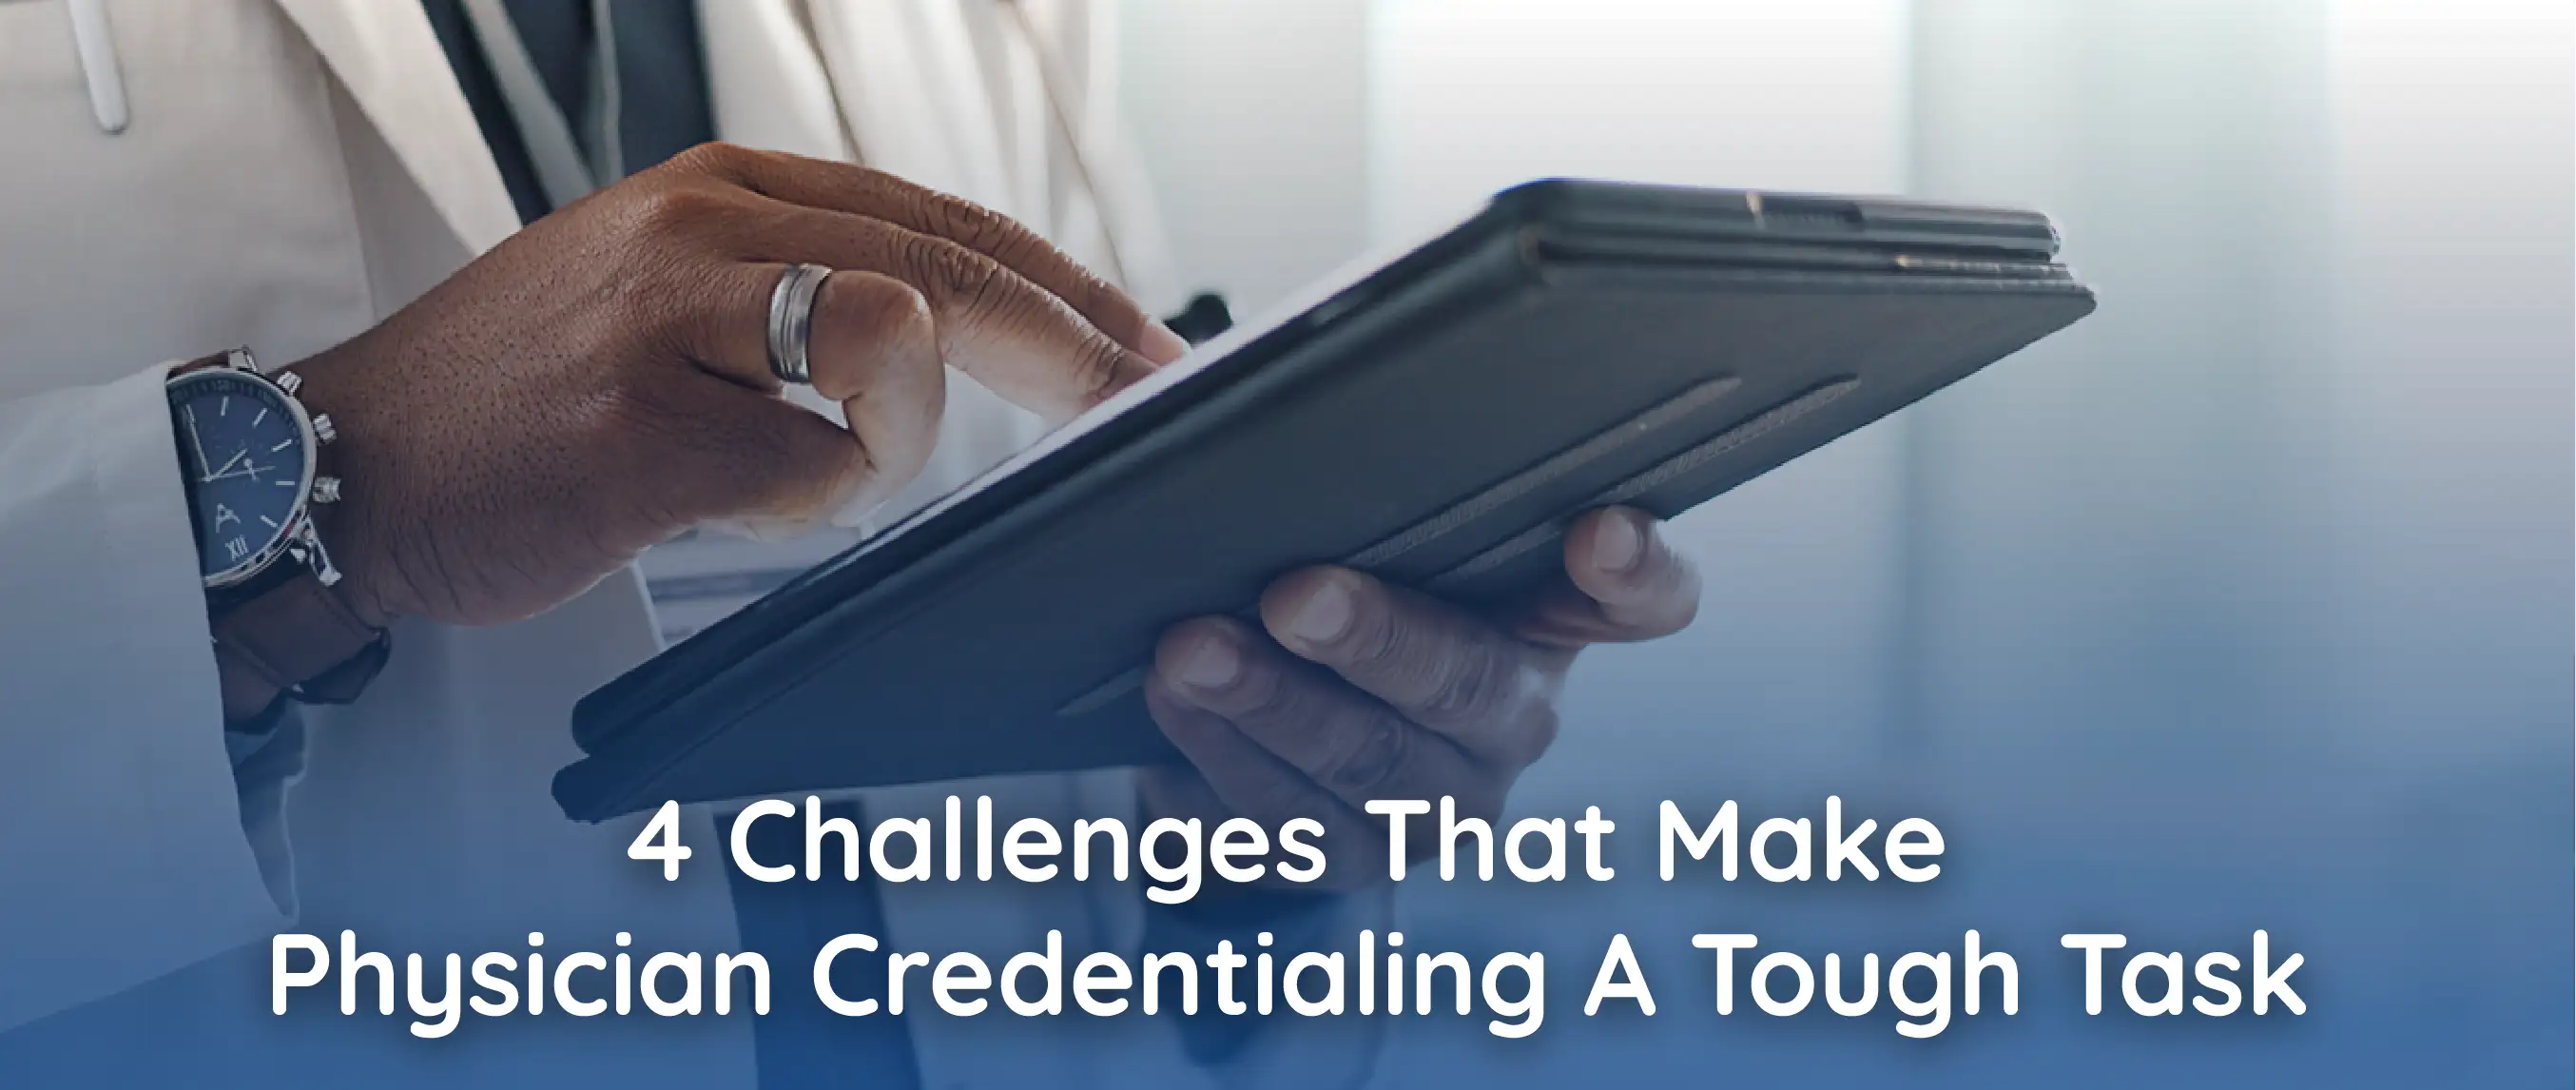 4 Challenges That Make Physician Credentialing A Tough Task